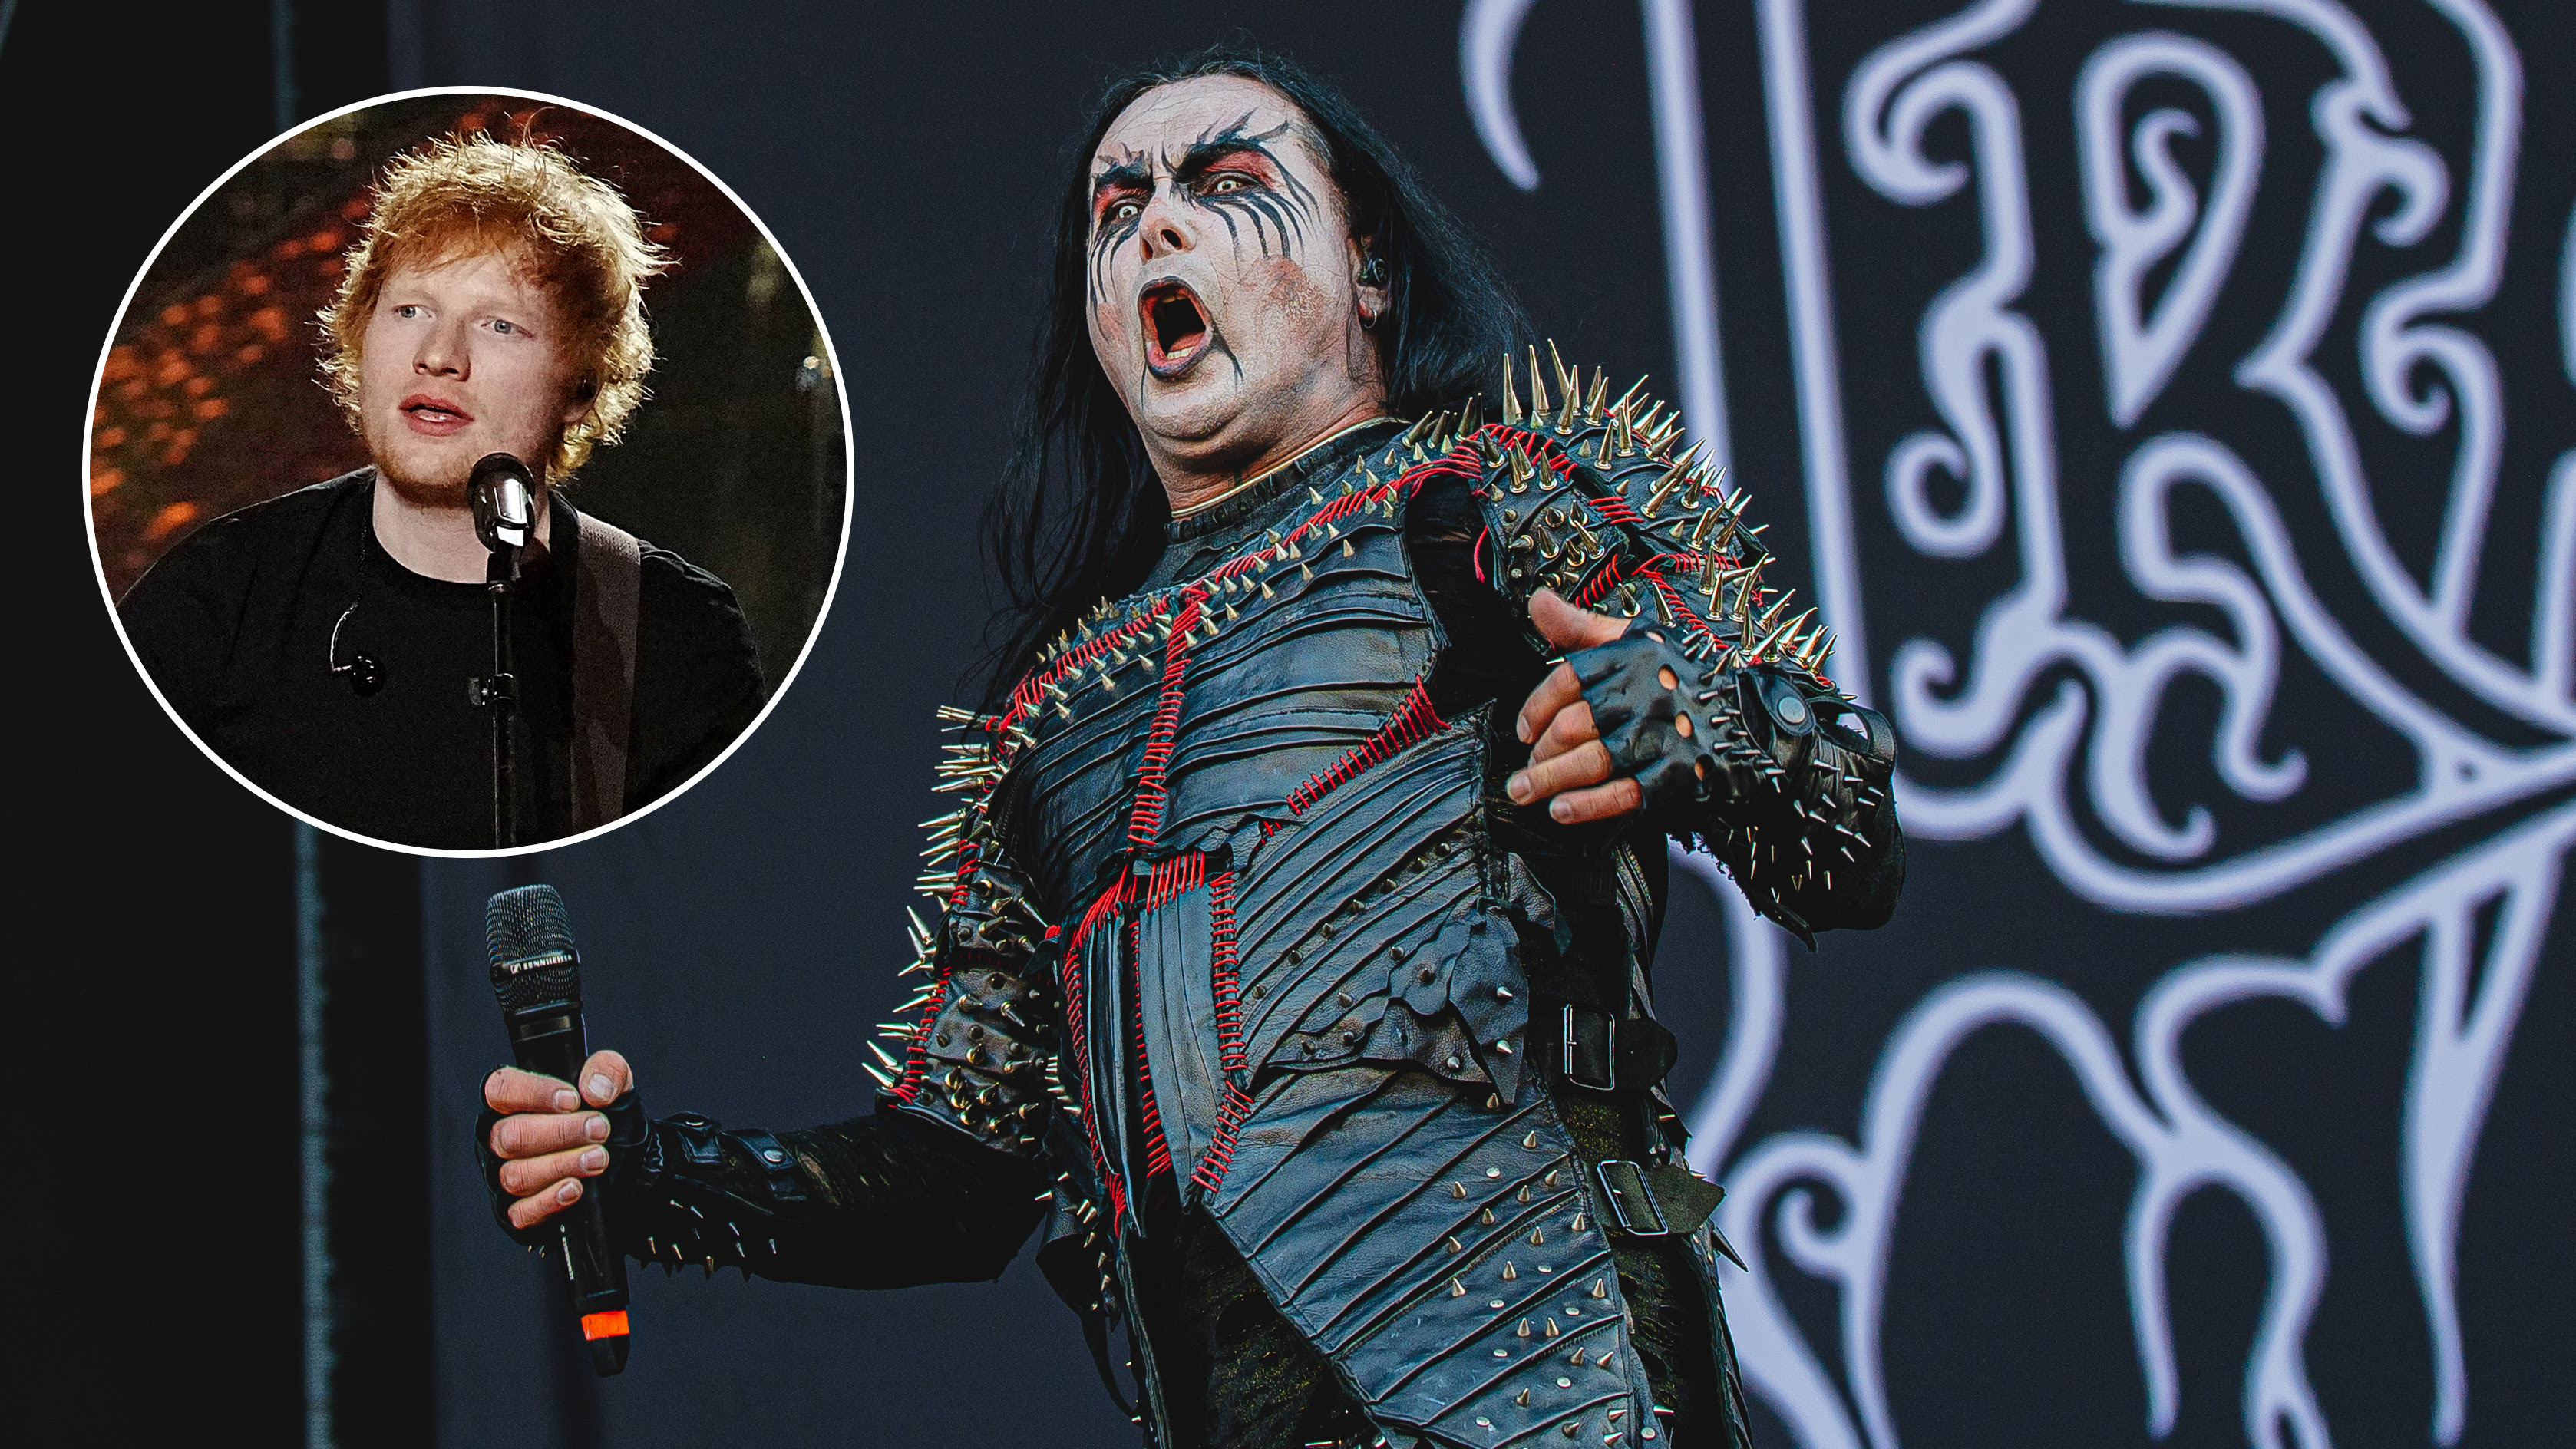 Cradle Of Filth's Dani Filth on his collaboration with Ed Sheeran: 